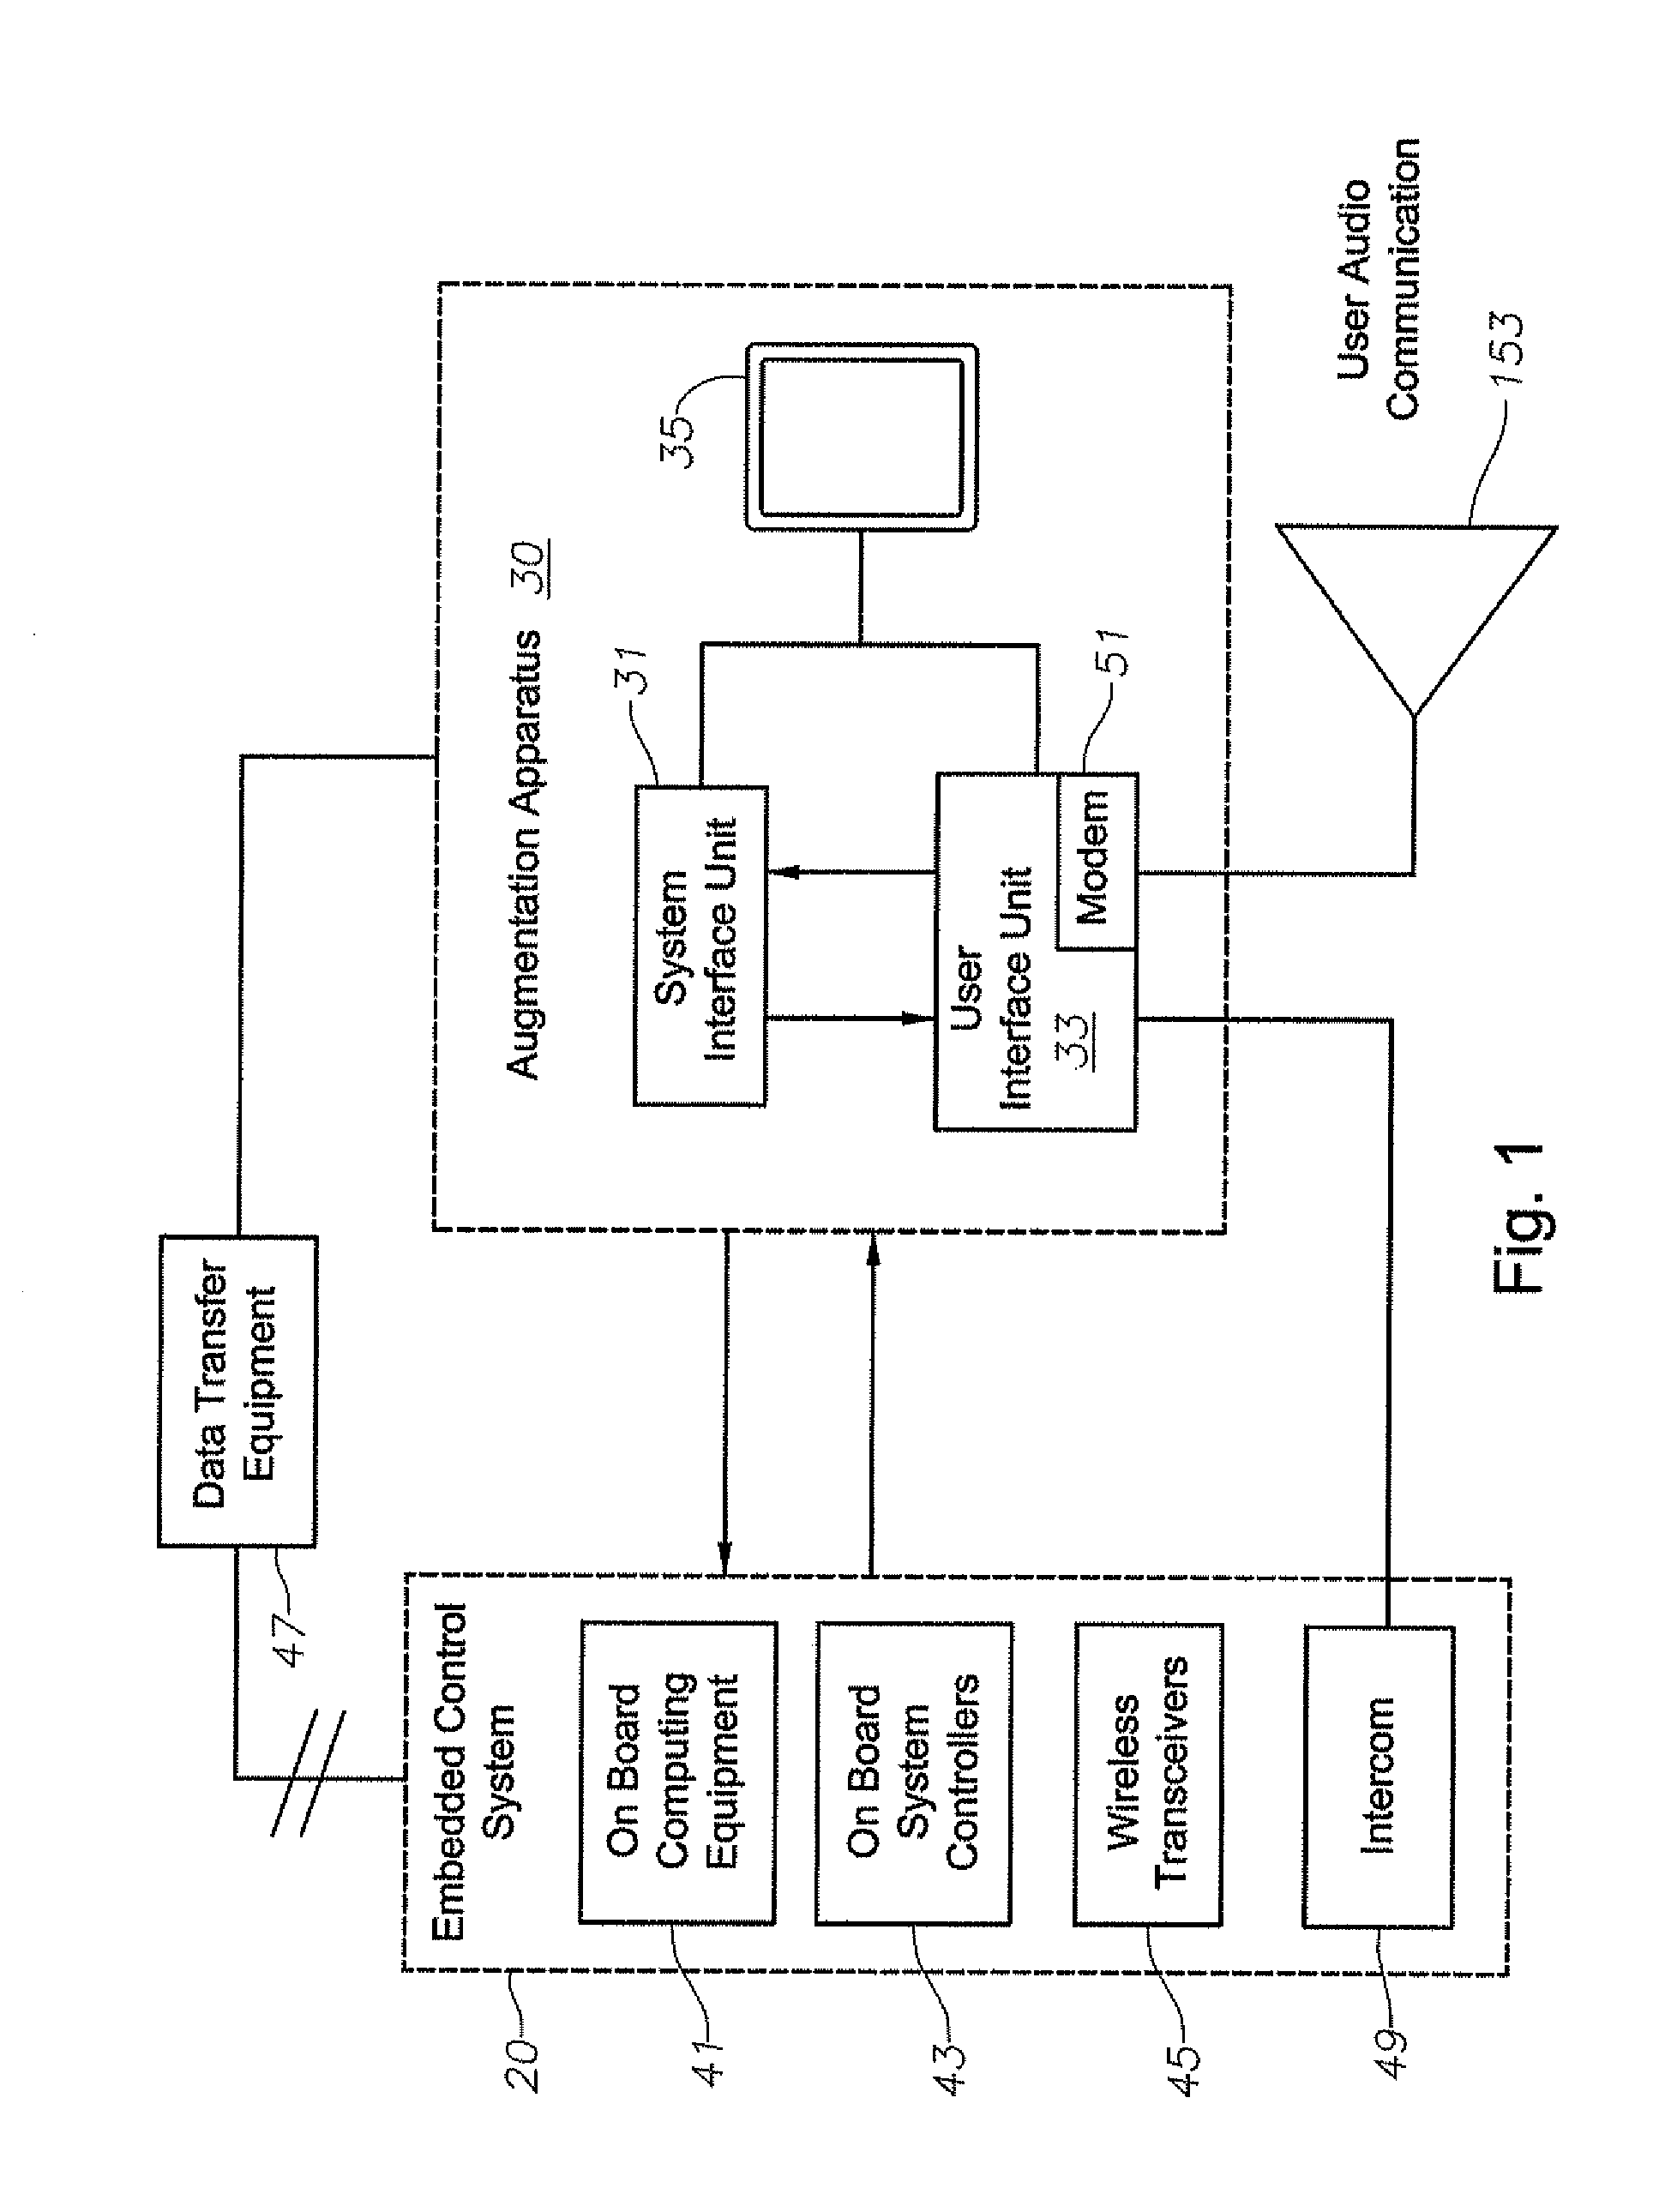 Apparatus, program product, and methods for updating data on embedded control systems